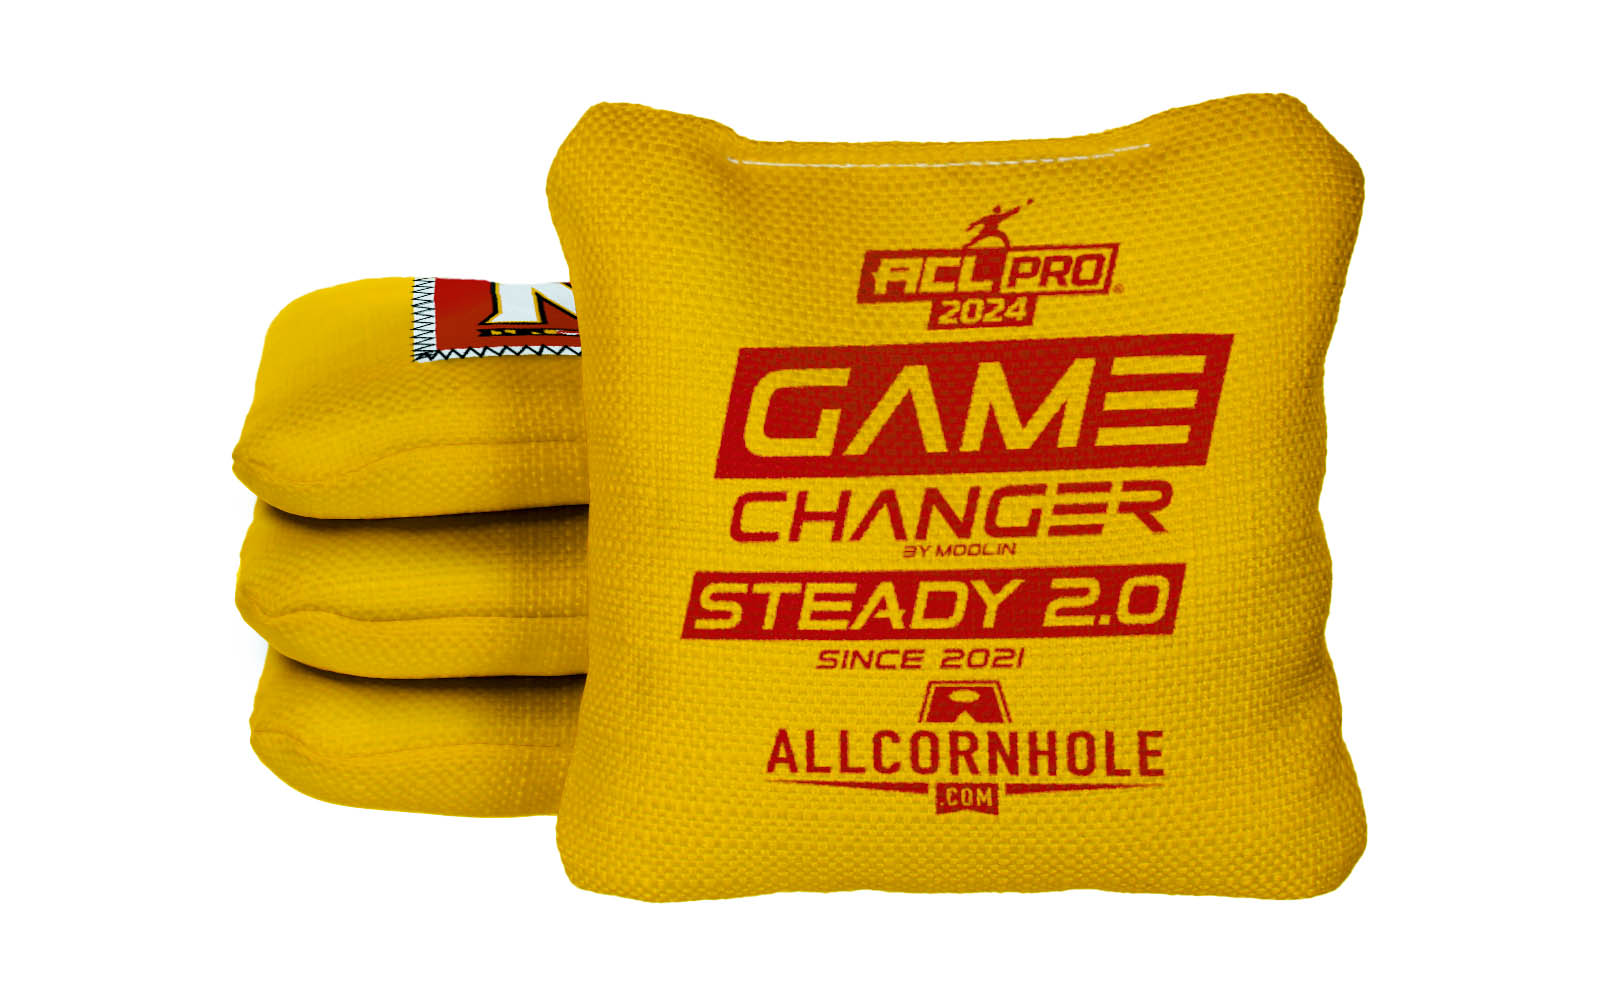 Officially Licensed Collegiate Cornhole Bags - Gamechanger Steady 2.0 - Set of 4 - University of Maryland